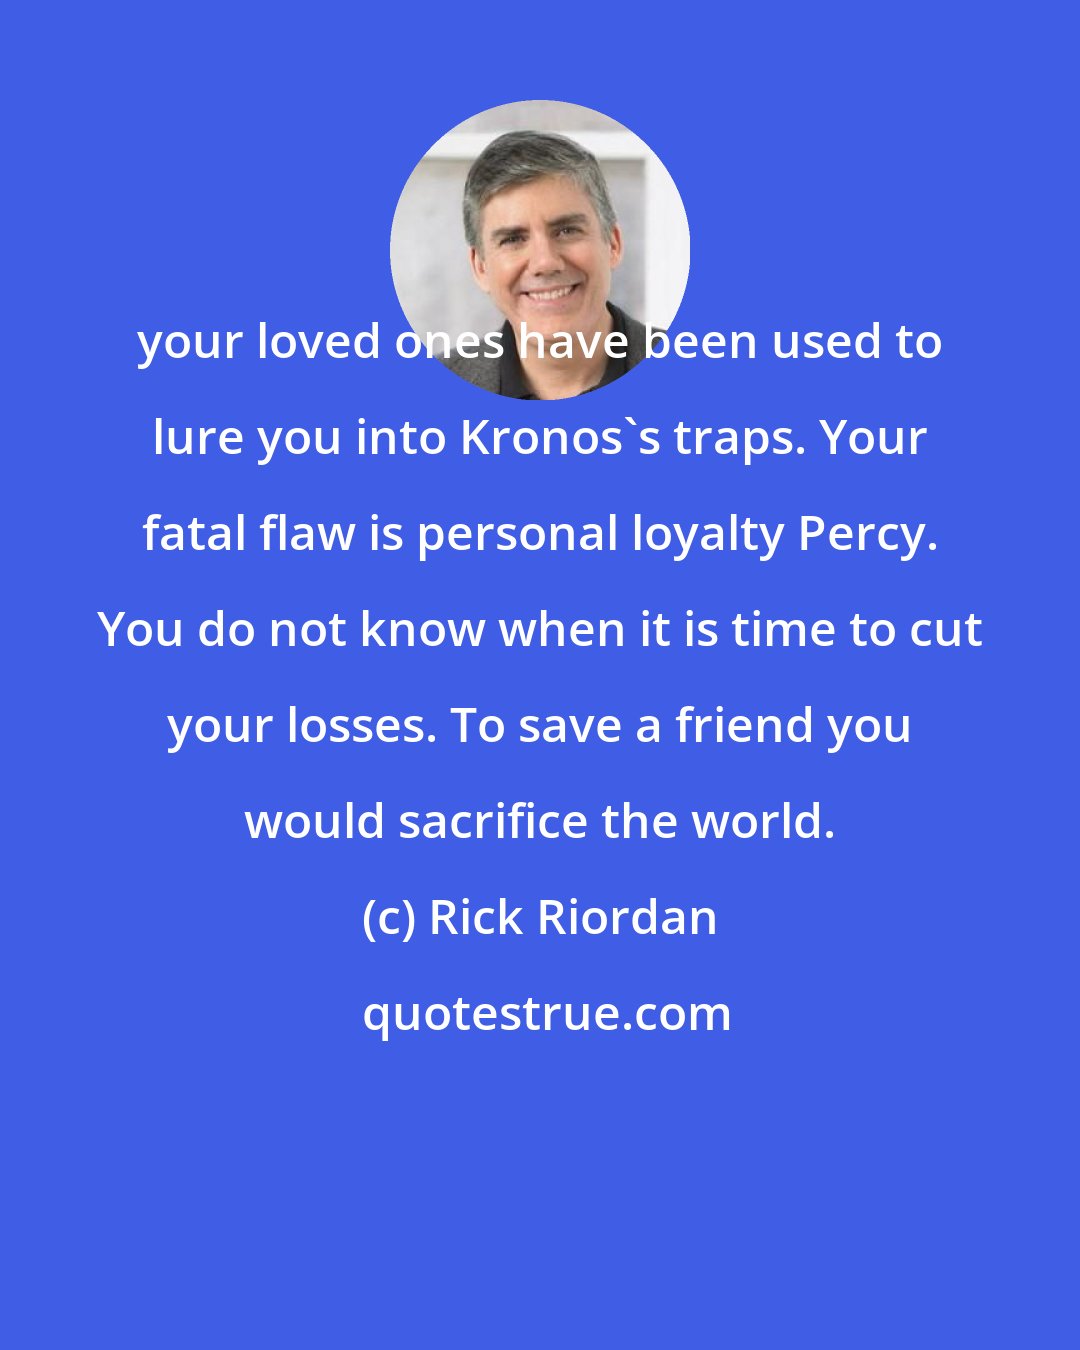 Rick Riordan: your loved ones have been used to lure you into Kronos's traps. Your fatal flaw is personal loyalty Percy. You do not know when it is time to cut your losses. To save a friend you would sacrifice the world.